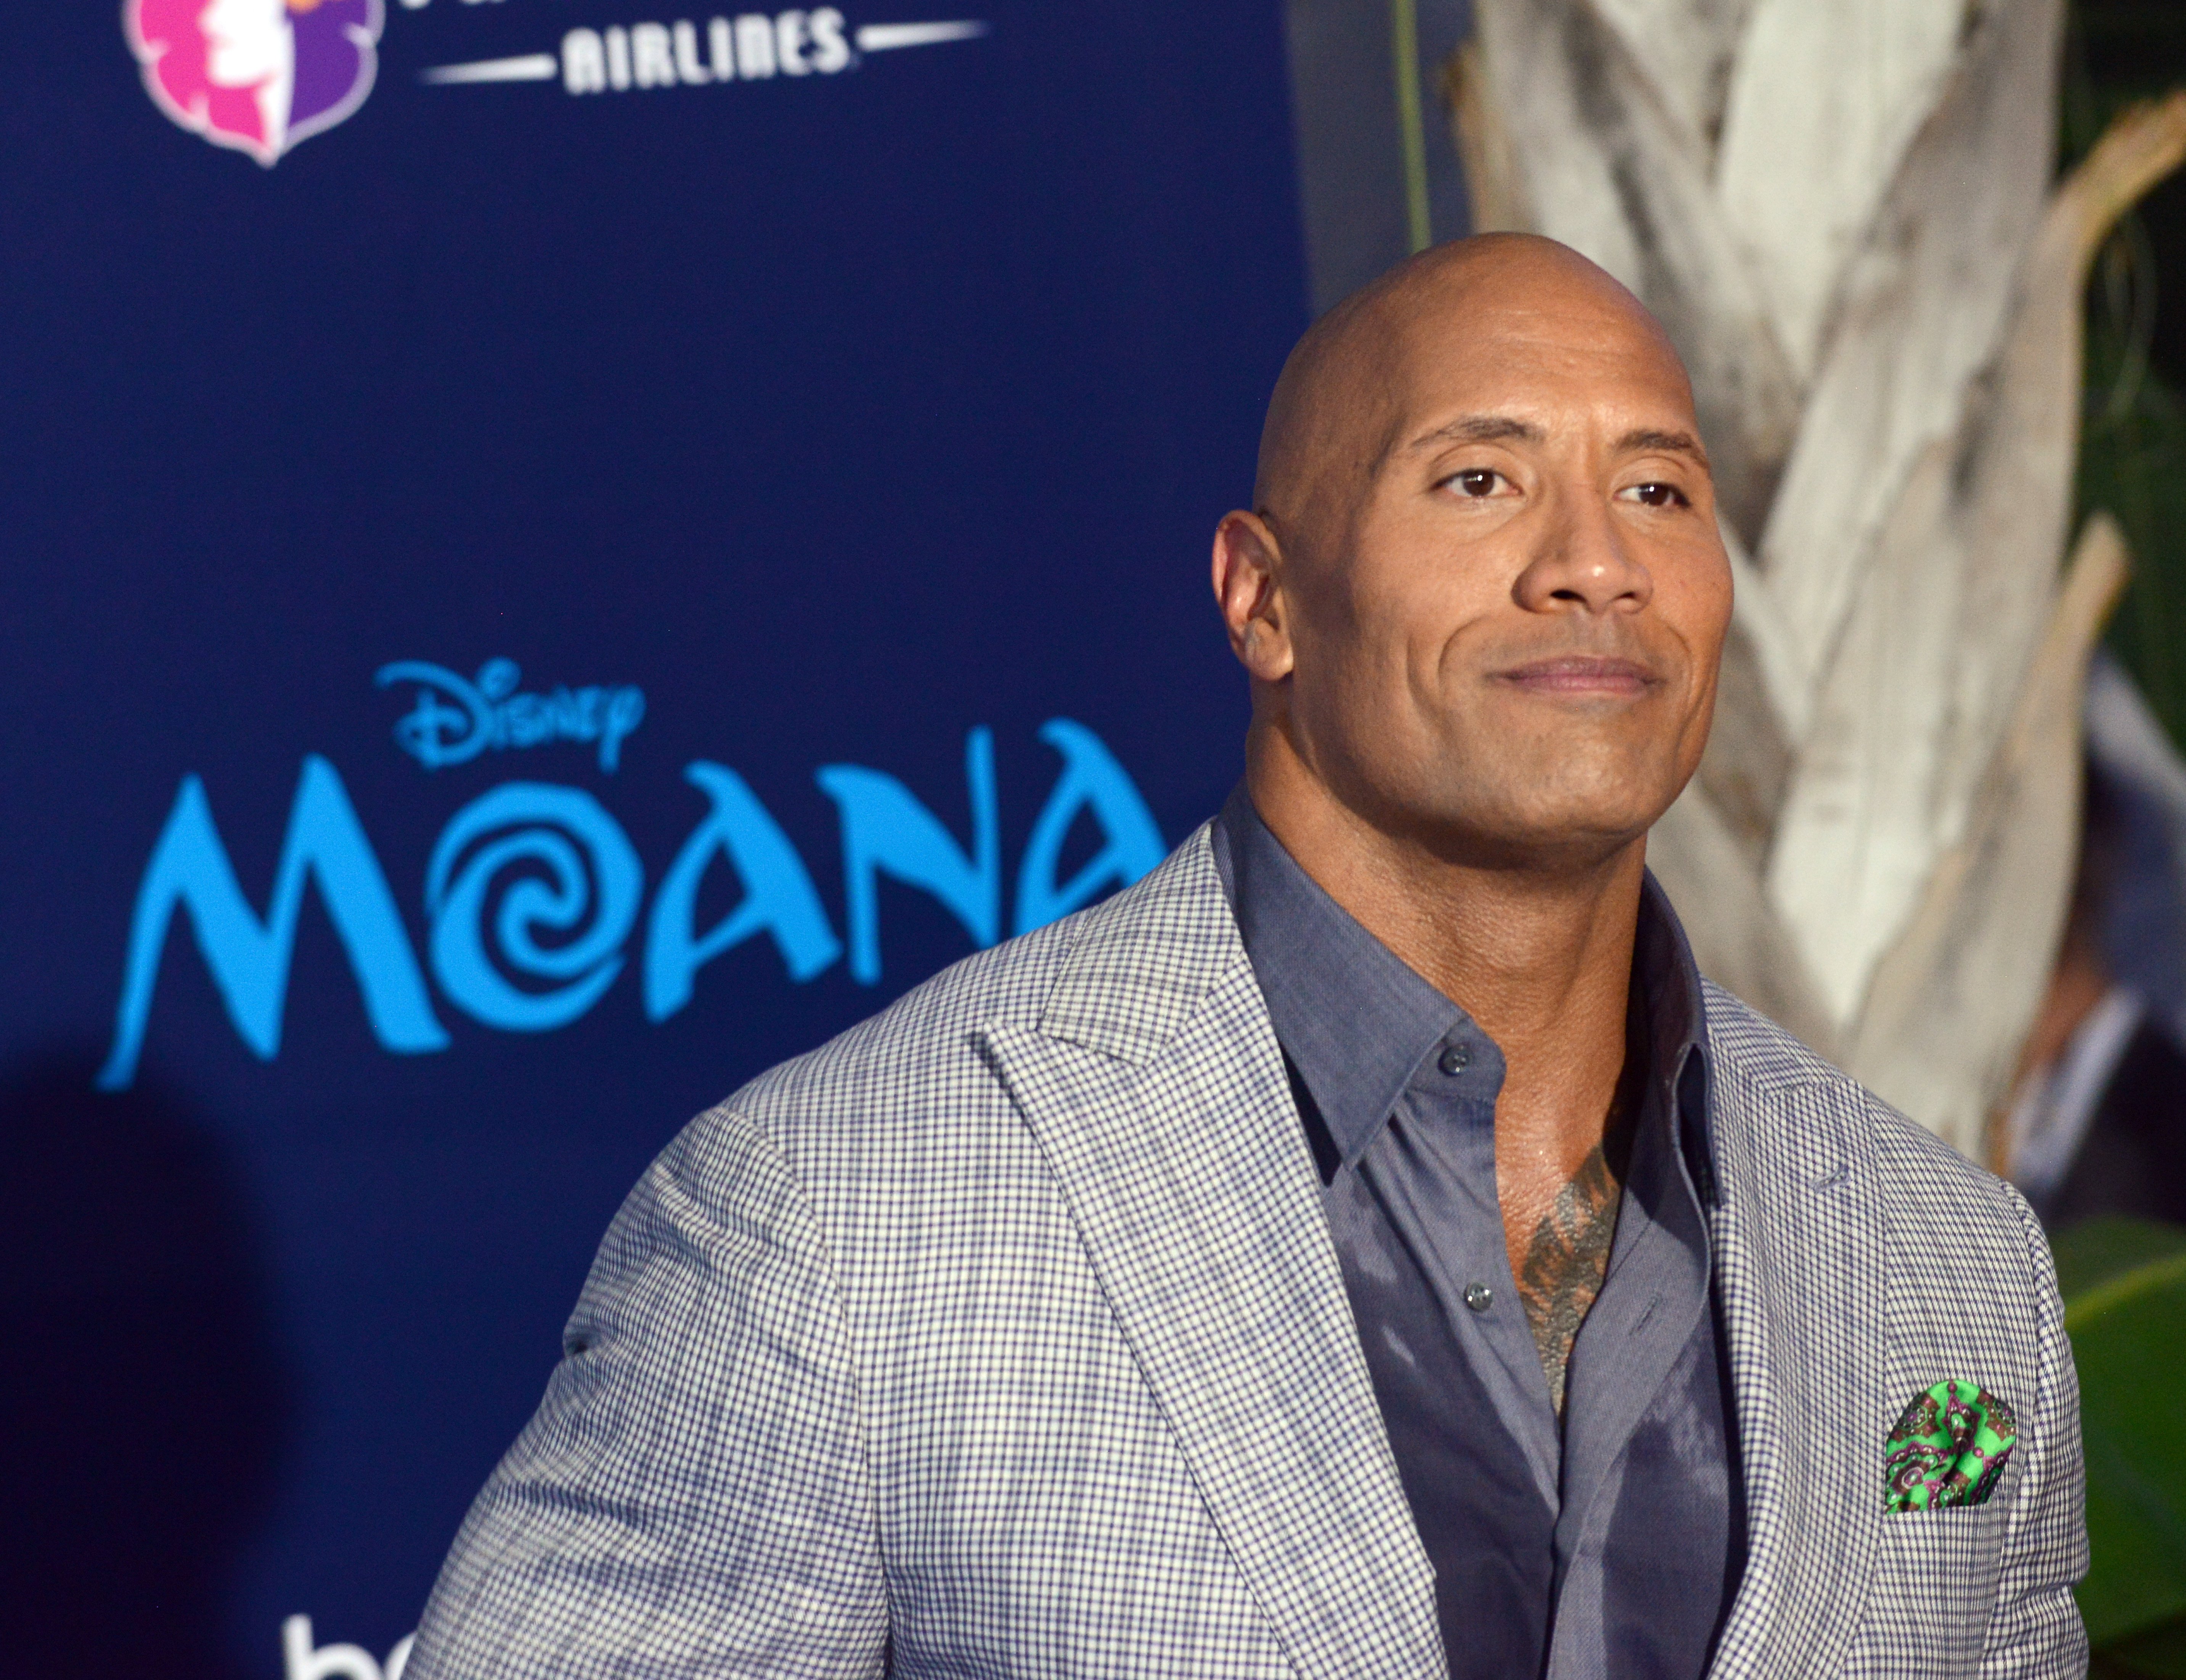 Dwayne Johnson arrives for the AFI FEST 2016 Presented By Audi - Premiere Of Disney's "Moana" held at the El Capitan Theatre on November 14, 2016, in Hollywood, California. | Source: Getty Images.